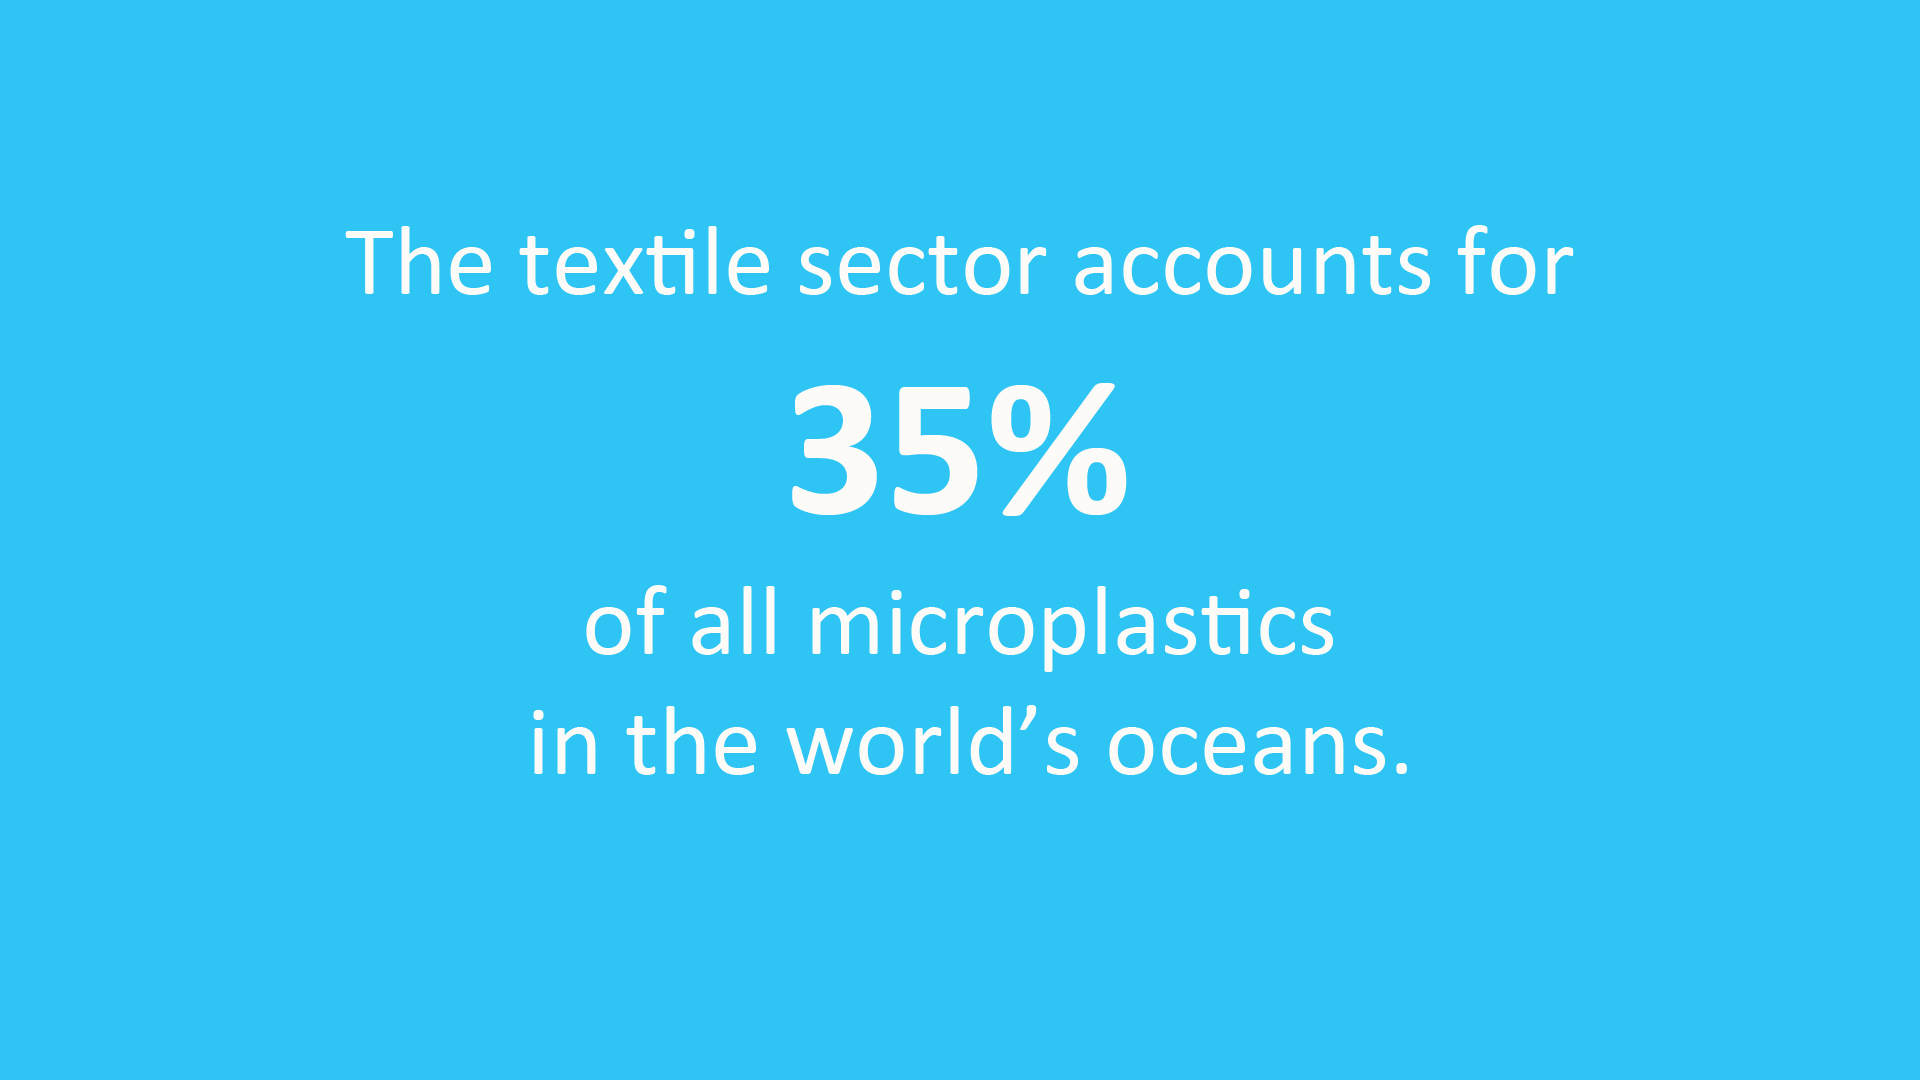 The textile sector accounts for 35 per cent of all microplastics in the world’s oceans.